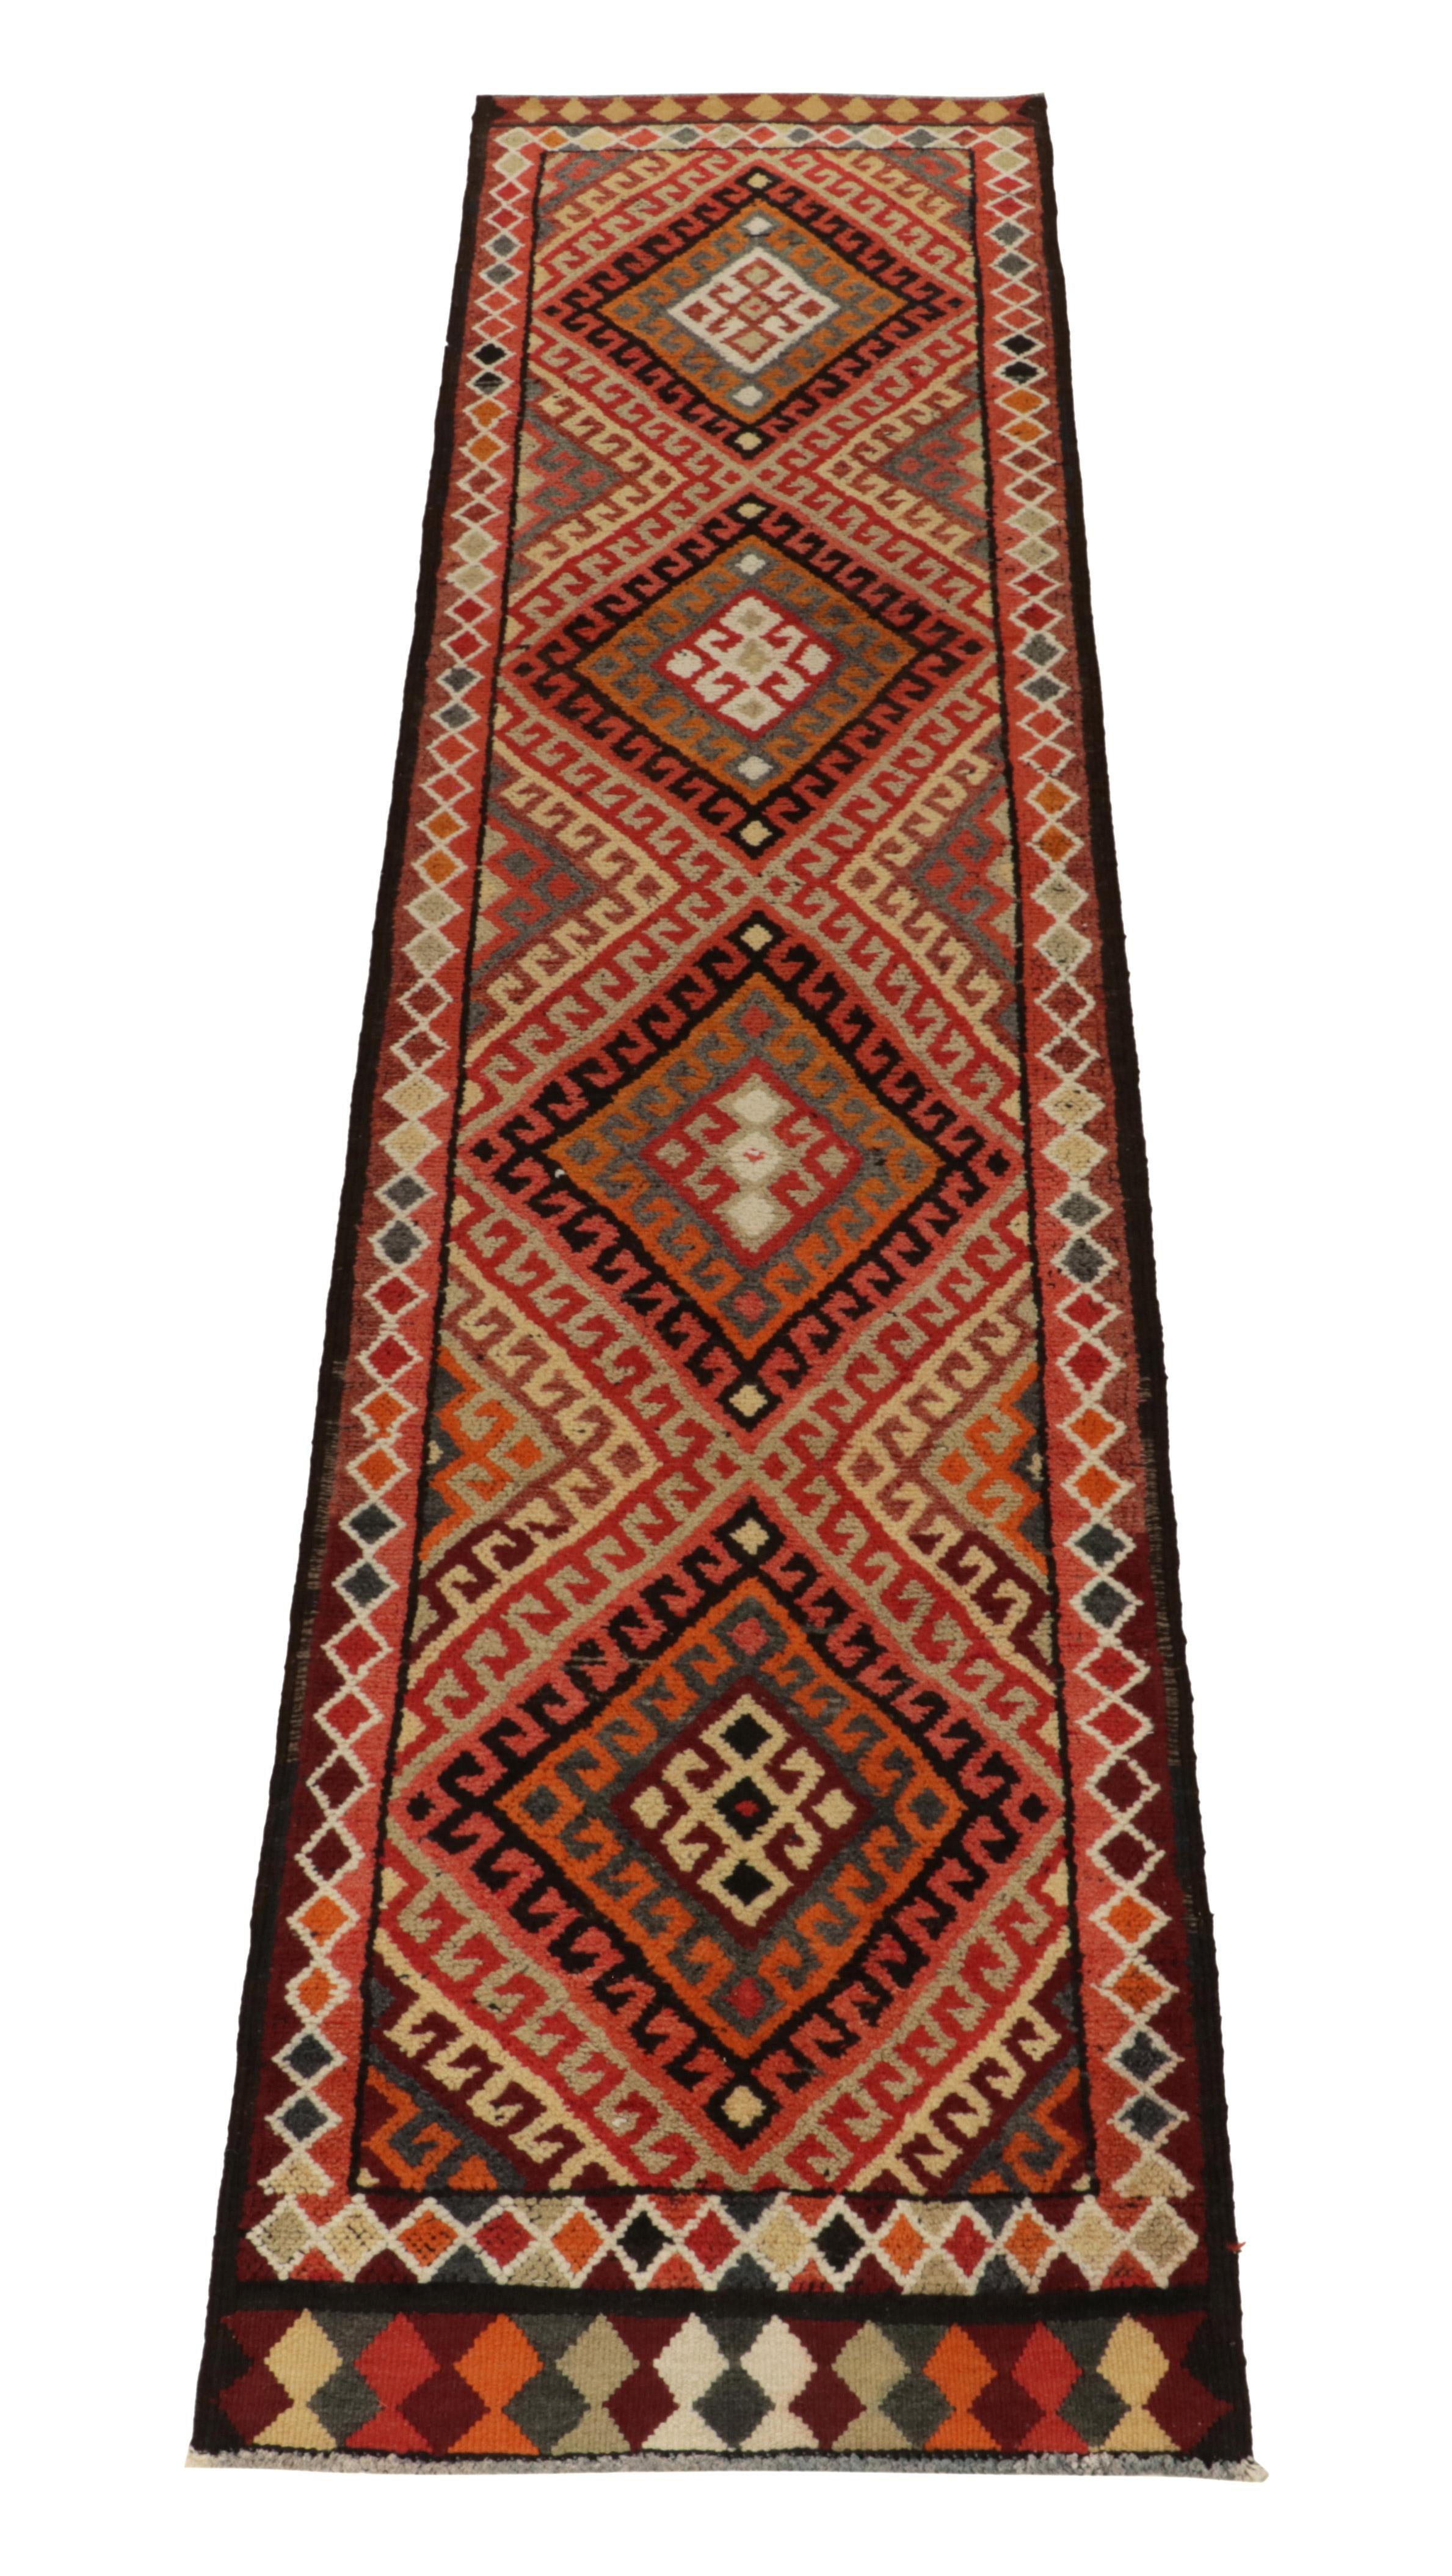 Hand-knotted in wool, a 3x12 runner from Rug & Kilim’s latest curation of rare tribal pieces from the mid-20th century. 

Originating from Turkey circa 1950-1960, the rug relishes a symmetric diamond pattern with traditional latch hooks in rich